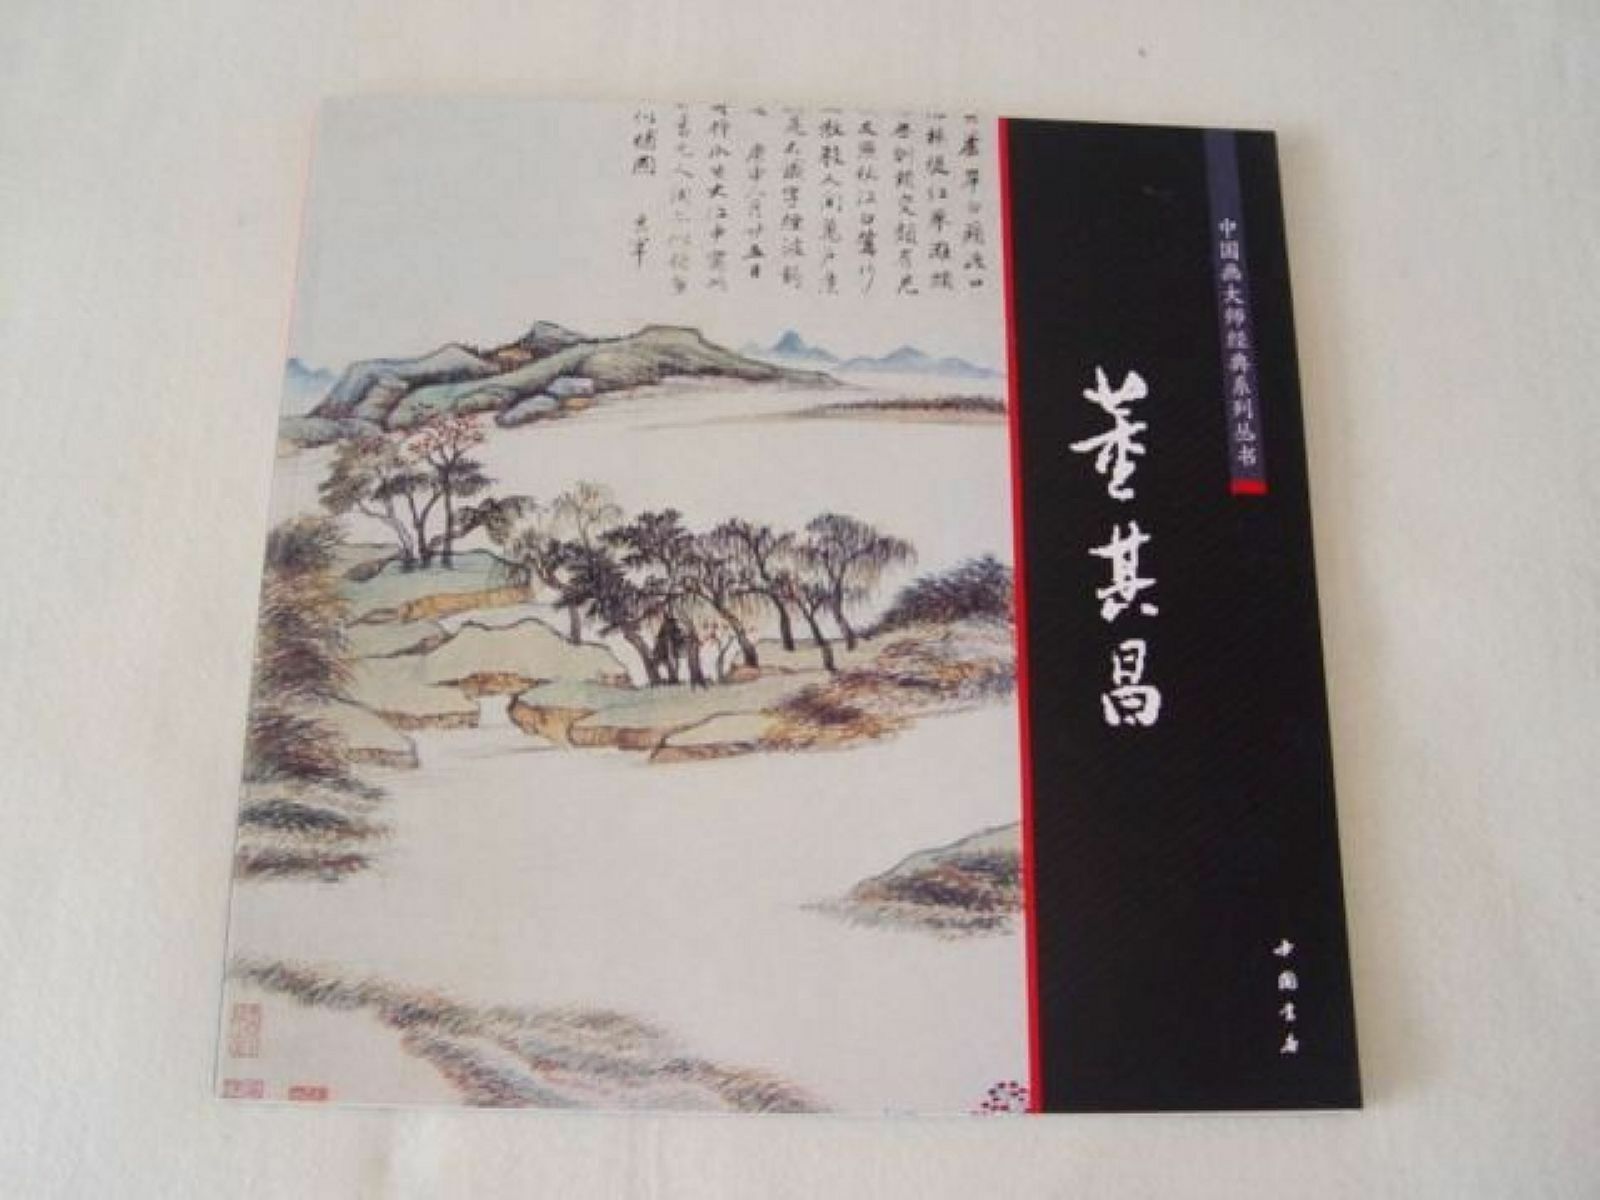 Chinese Brush Ink Painting Calligraphy Sumi-e Dong Qichang 董其昌 Landscape Tree